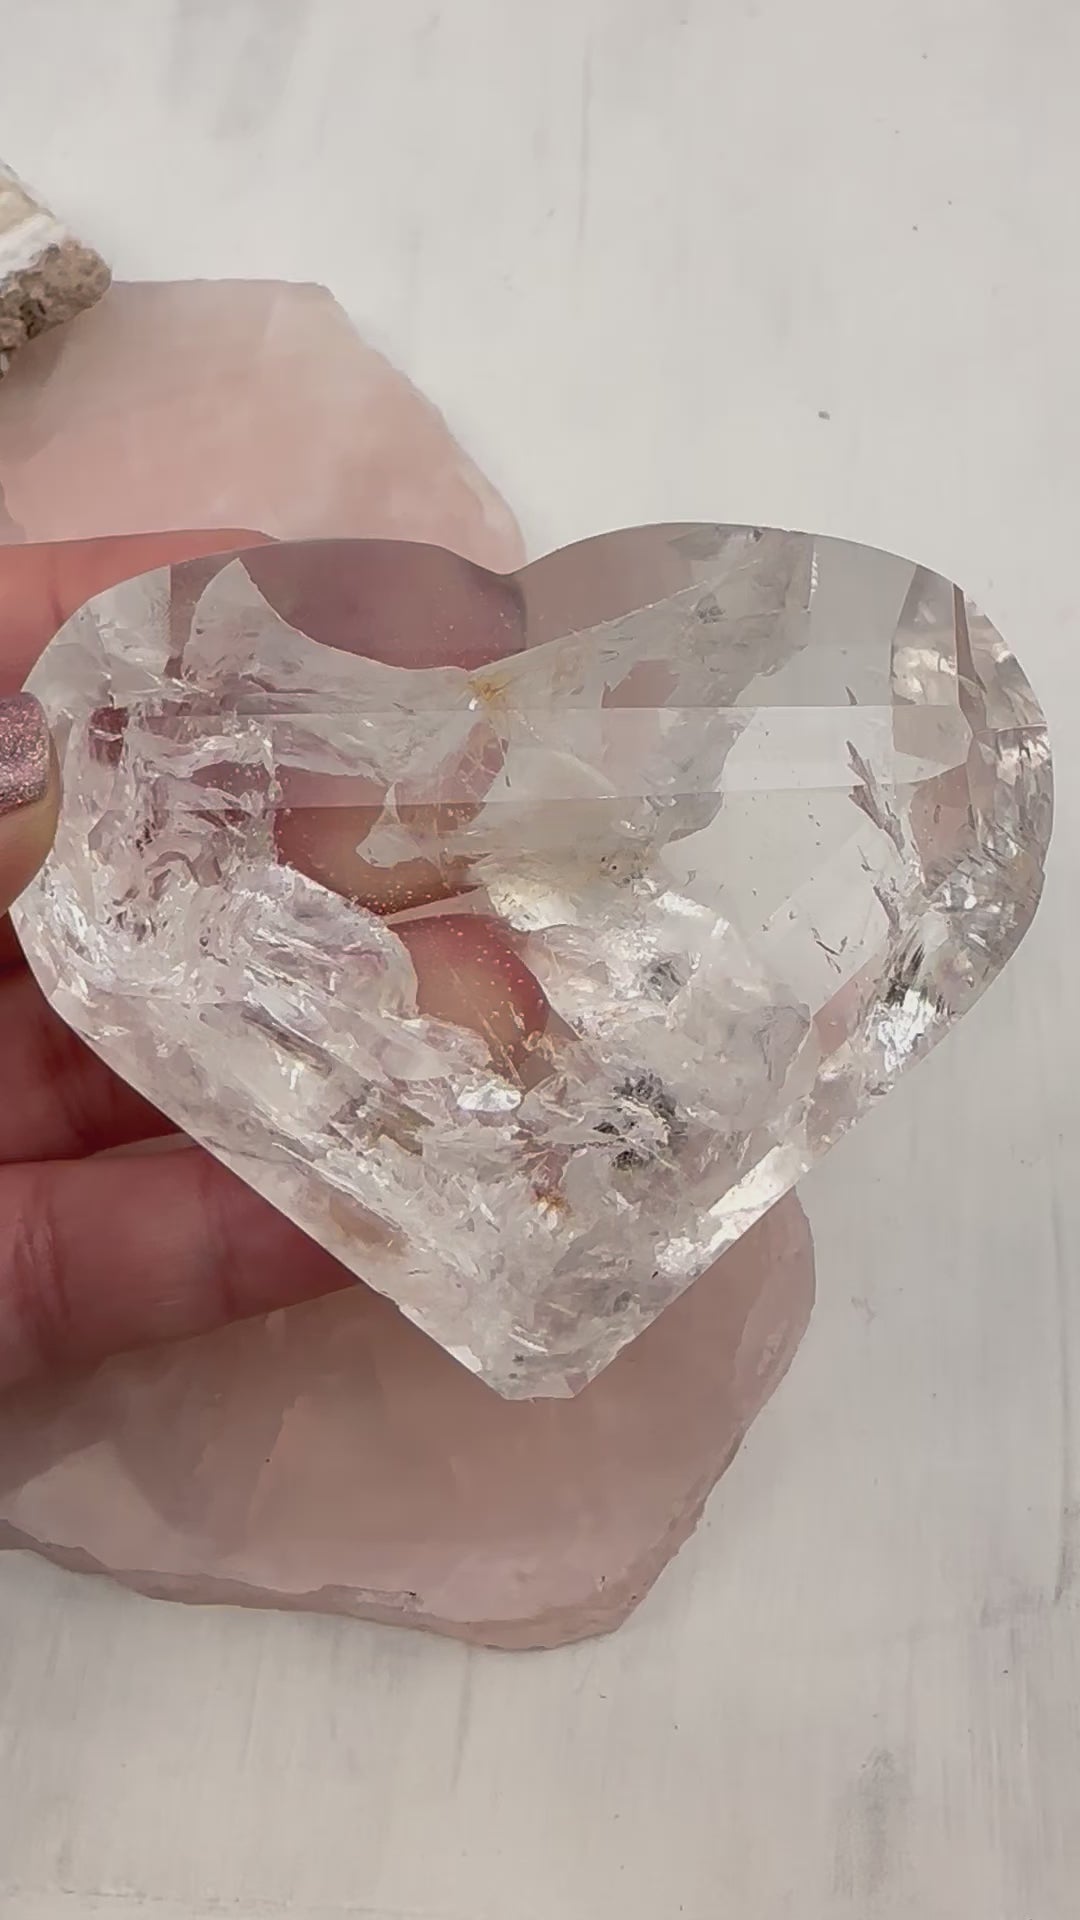 Faceted Crystal Quartz Heart - Crystal Heart - OOAK - AS IS